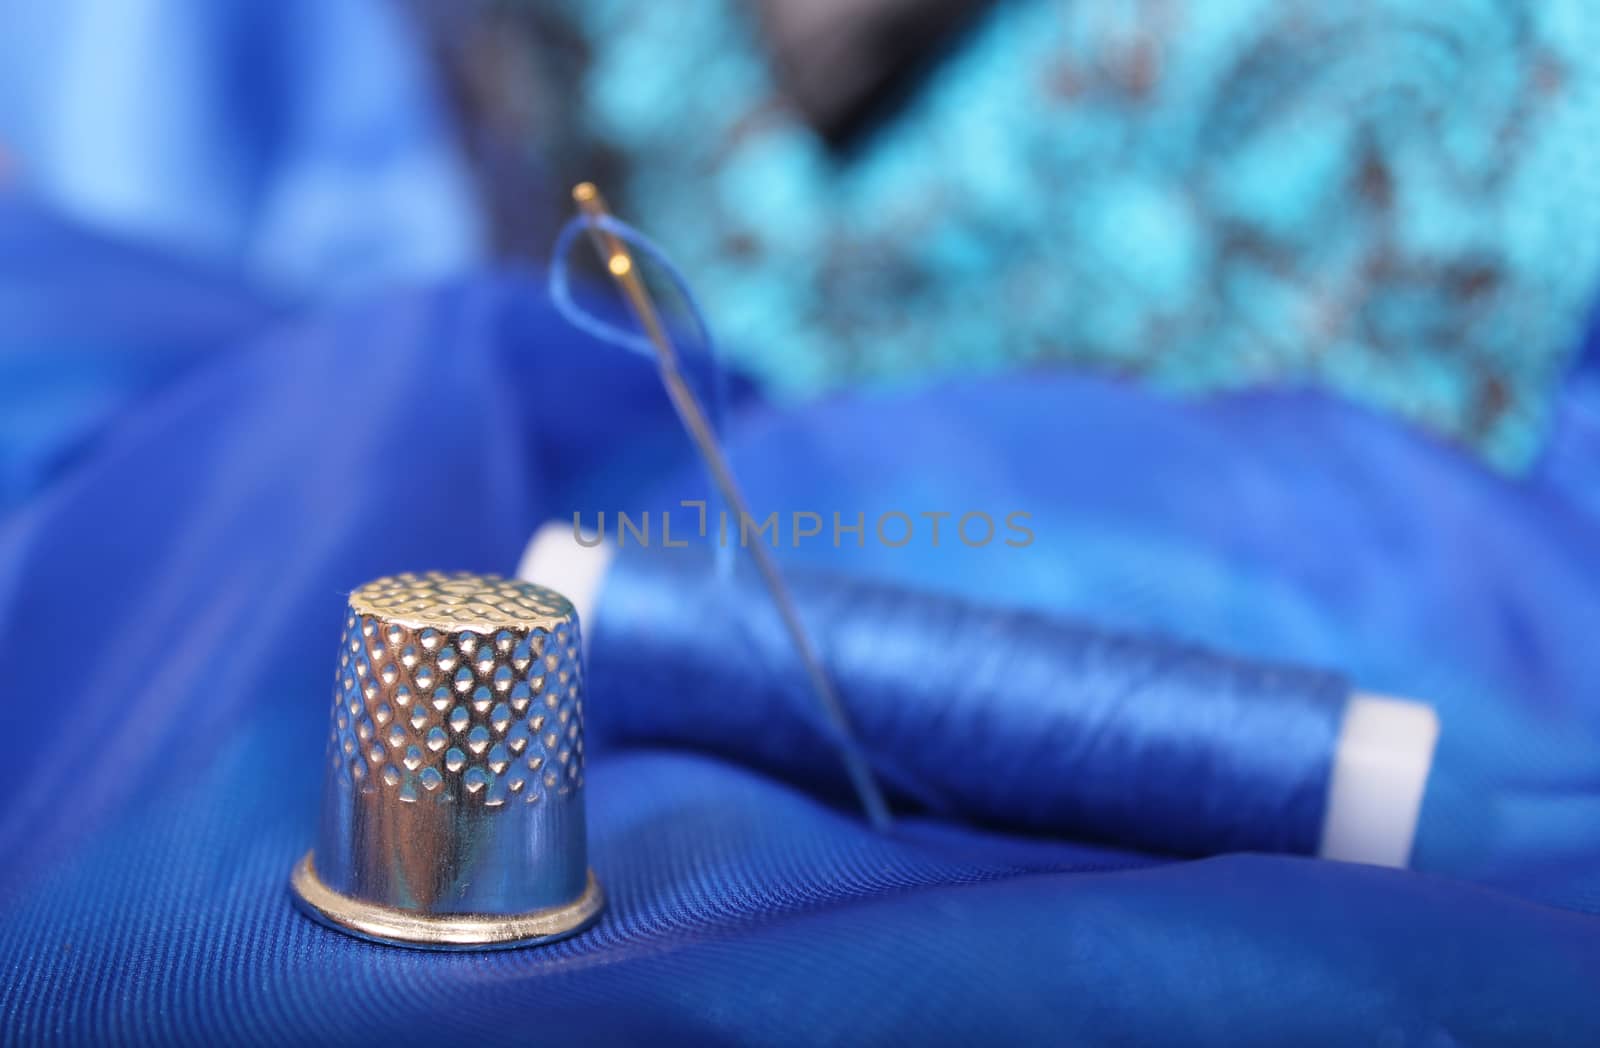 Thimble and Blue Thread on Blue Fabric by Marti157900